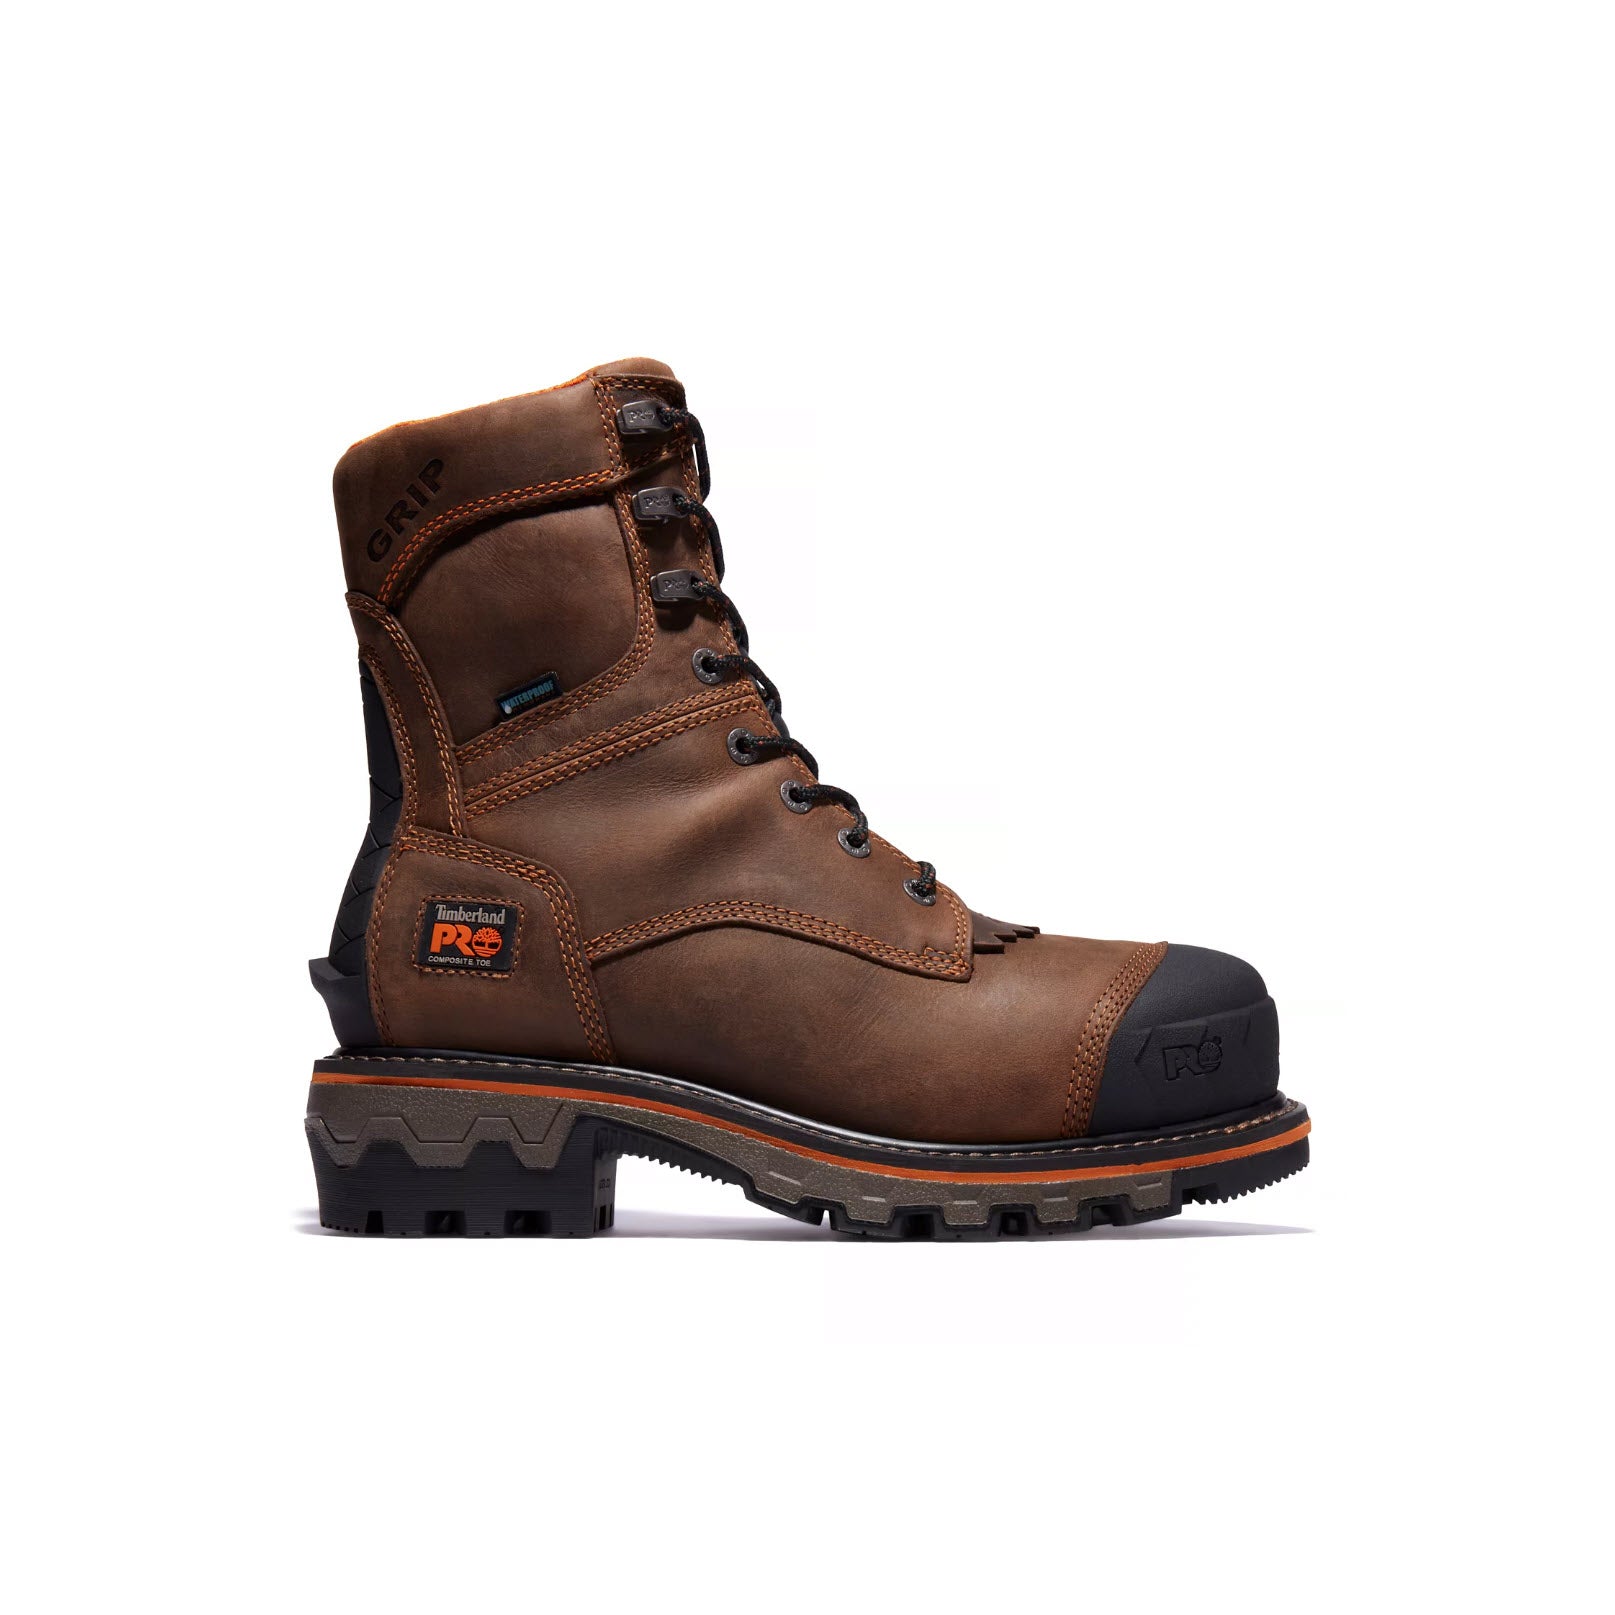 A single Timberland Pro Boondock HD Comp Toe Logger Brown boot with a high ankle design and a reinforced sole on a white background.